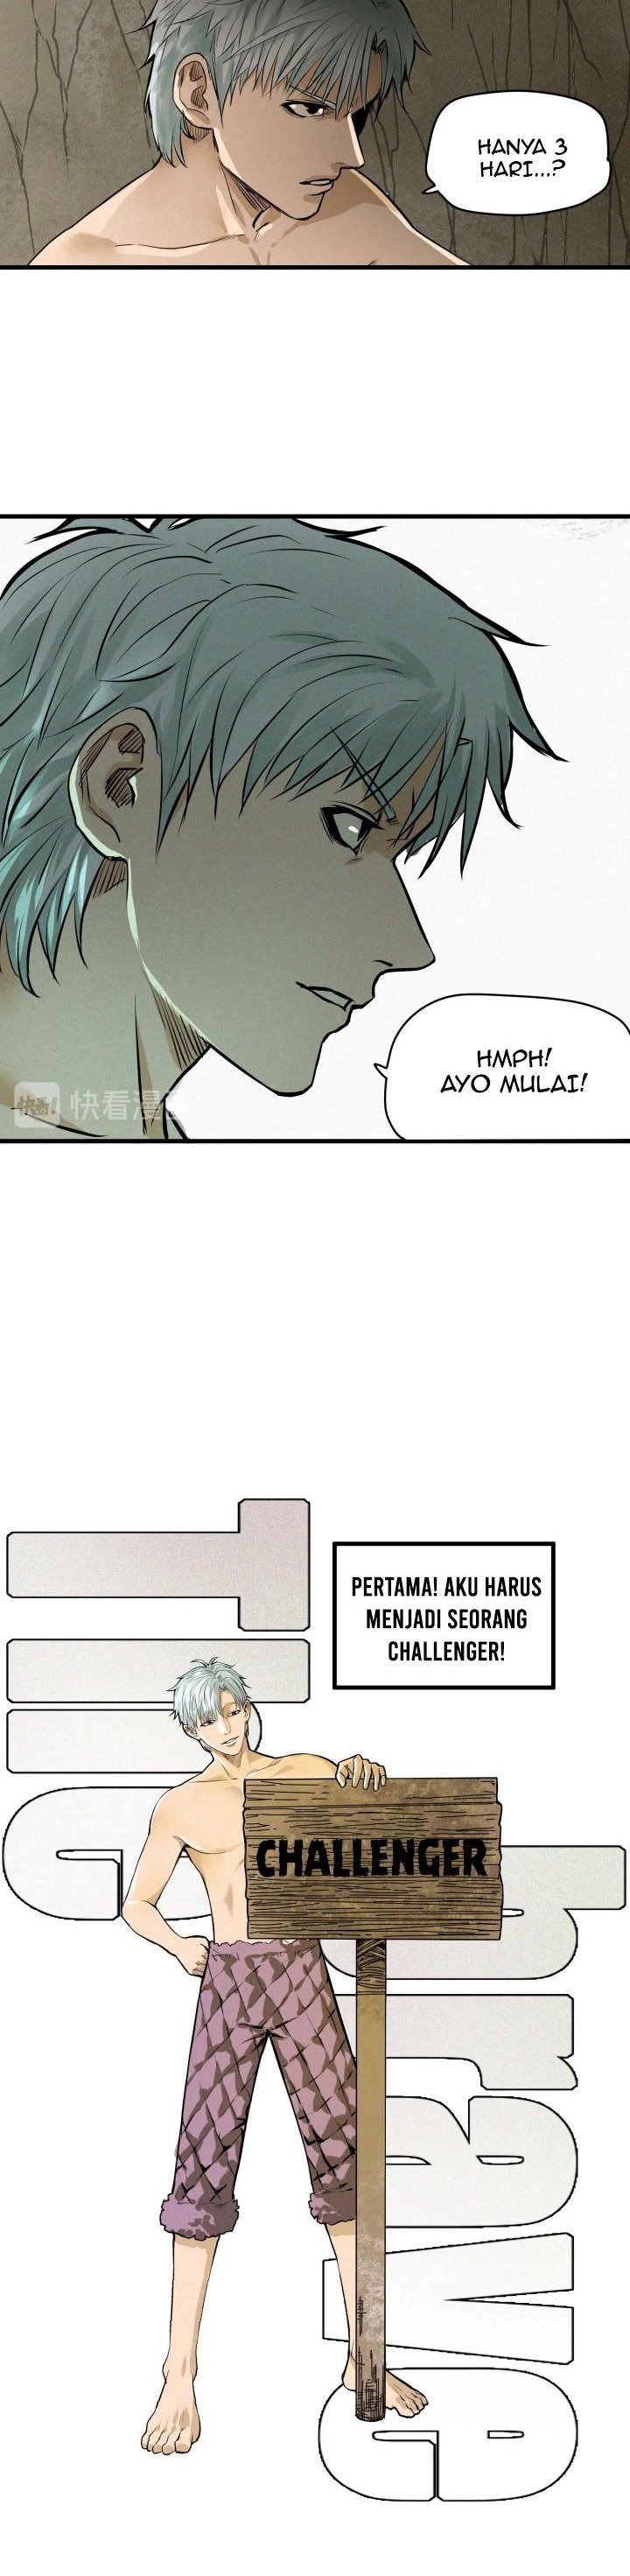 Baca I Was Raised By The Boss (I Was Beaten Up By The BOSS) Chapter 3  - GudangKomik